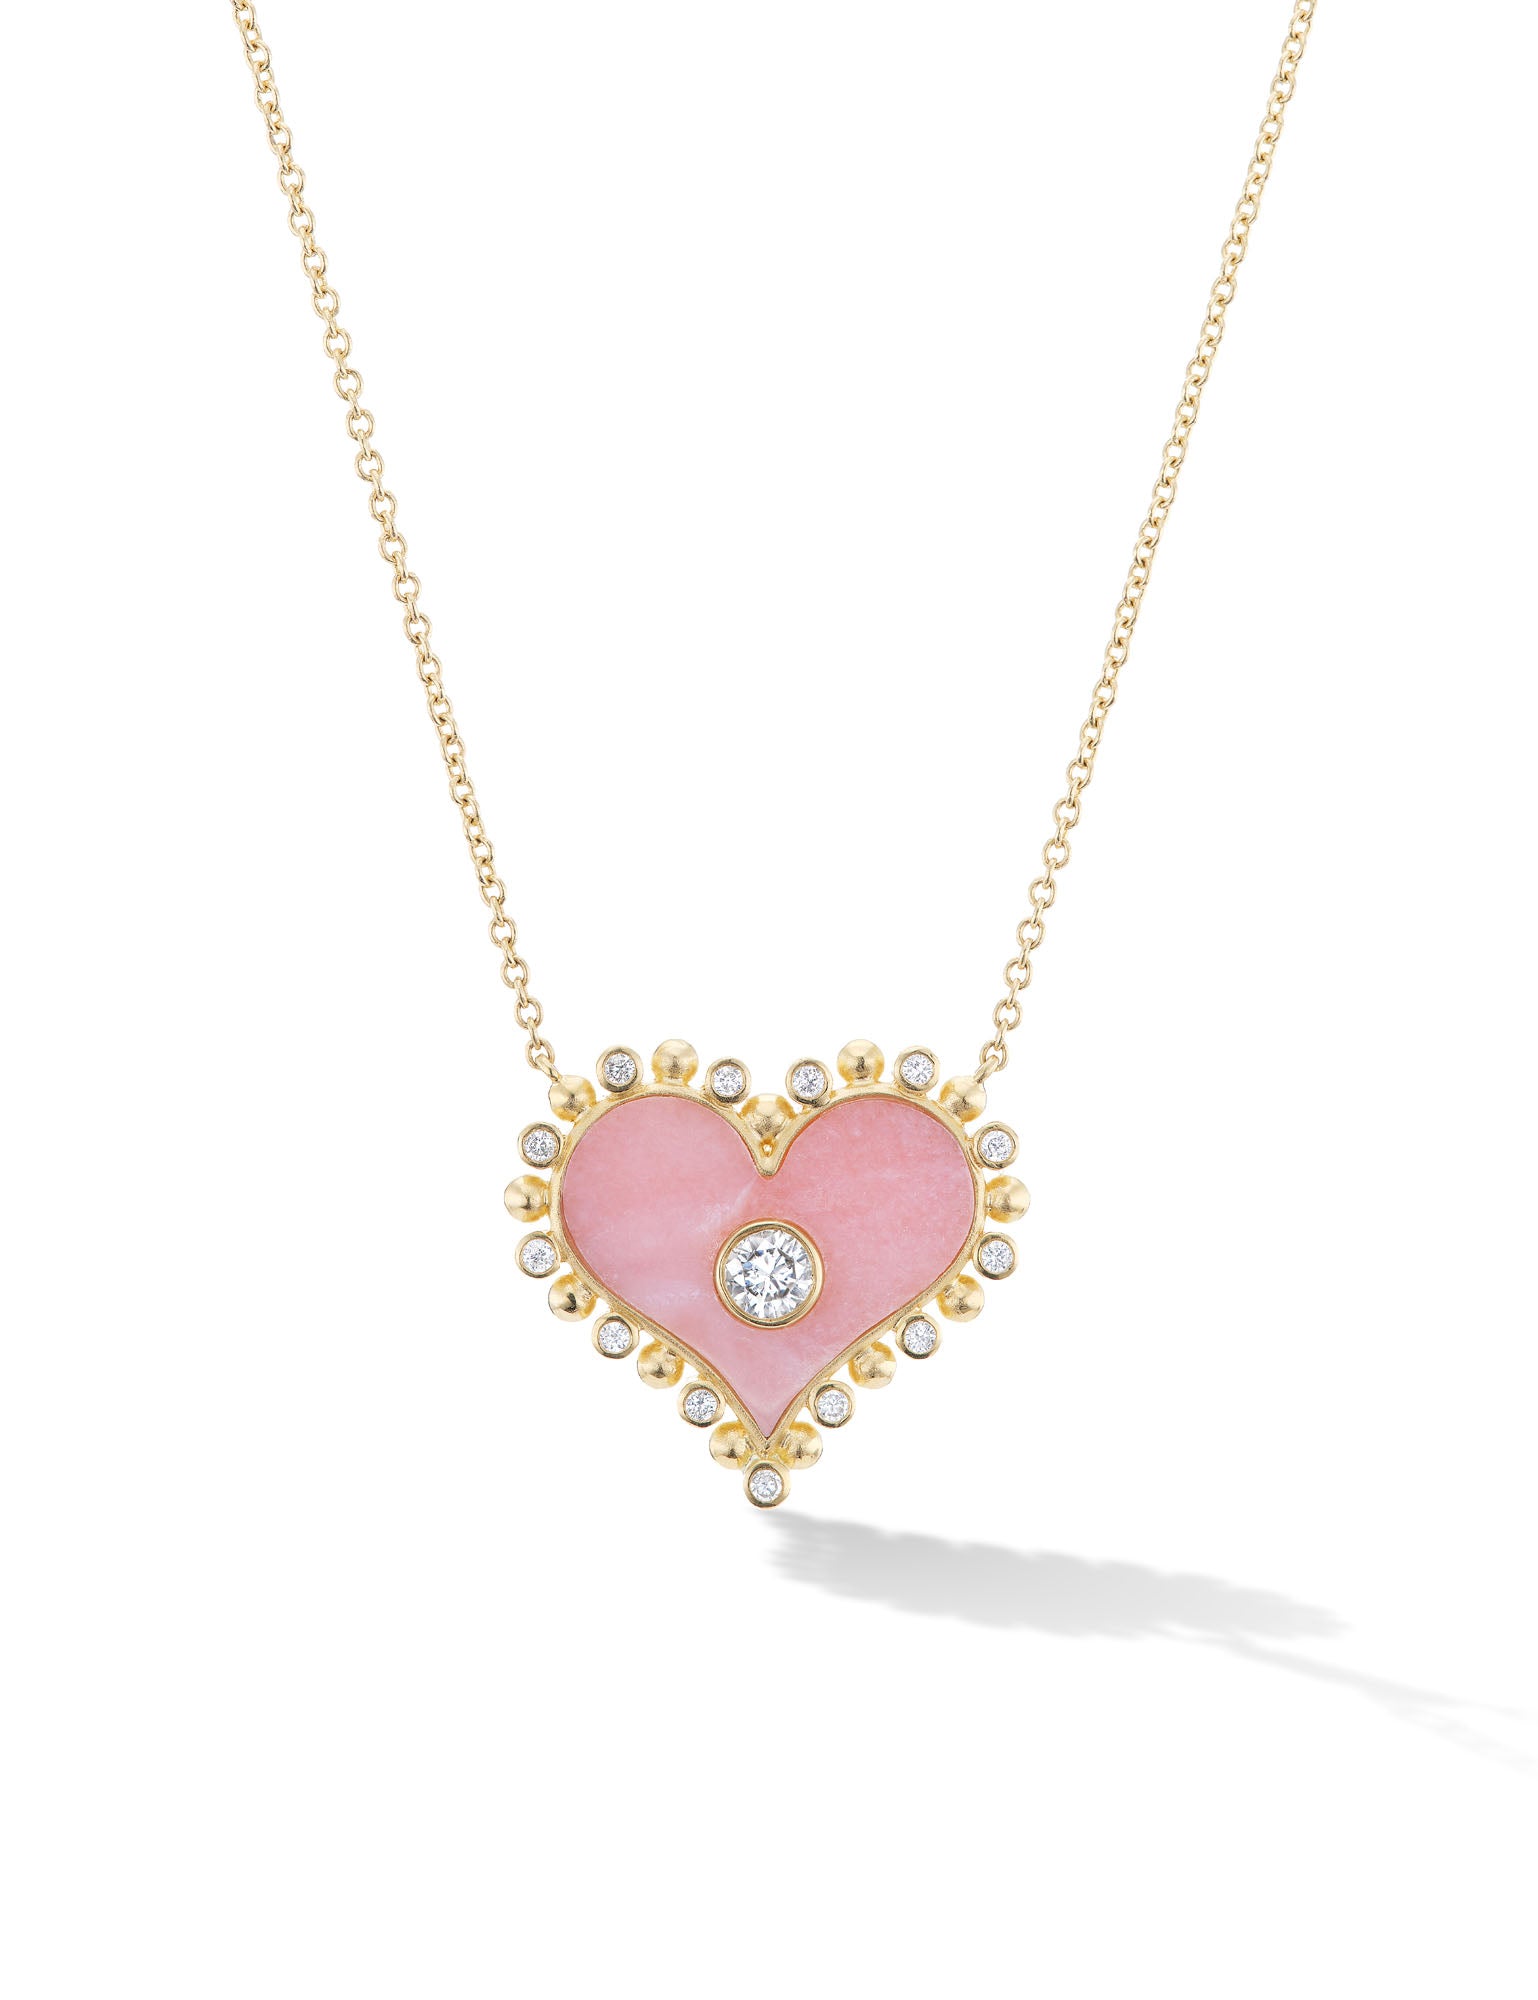 Get the best deals on CHANEL Heart Fashion Necklaces & Pendants when you  shop the largest online selection at . Free shipping on many items, Browse your favorite brands